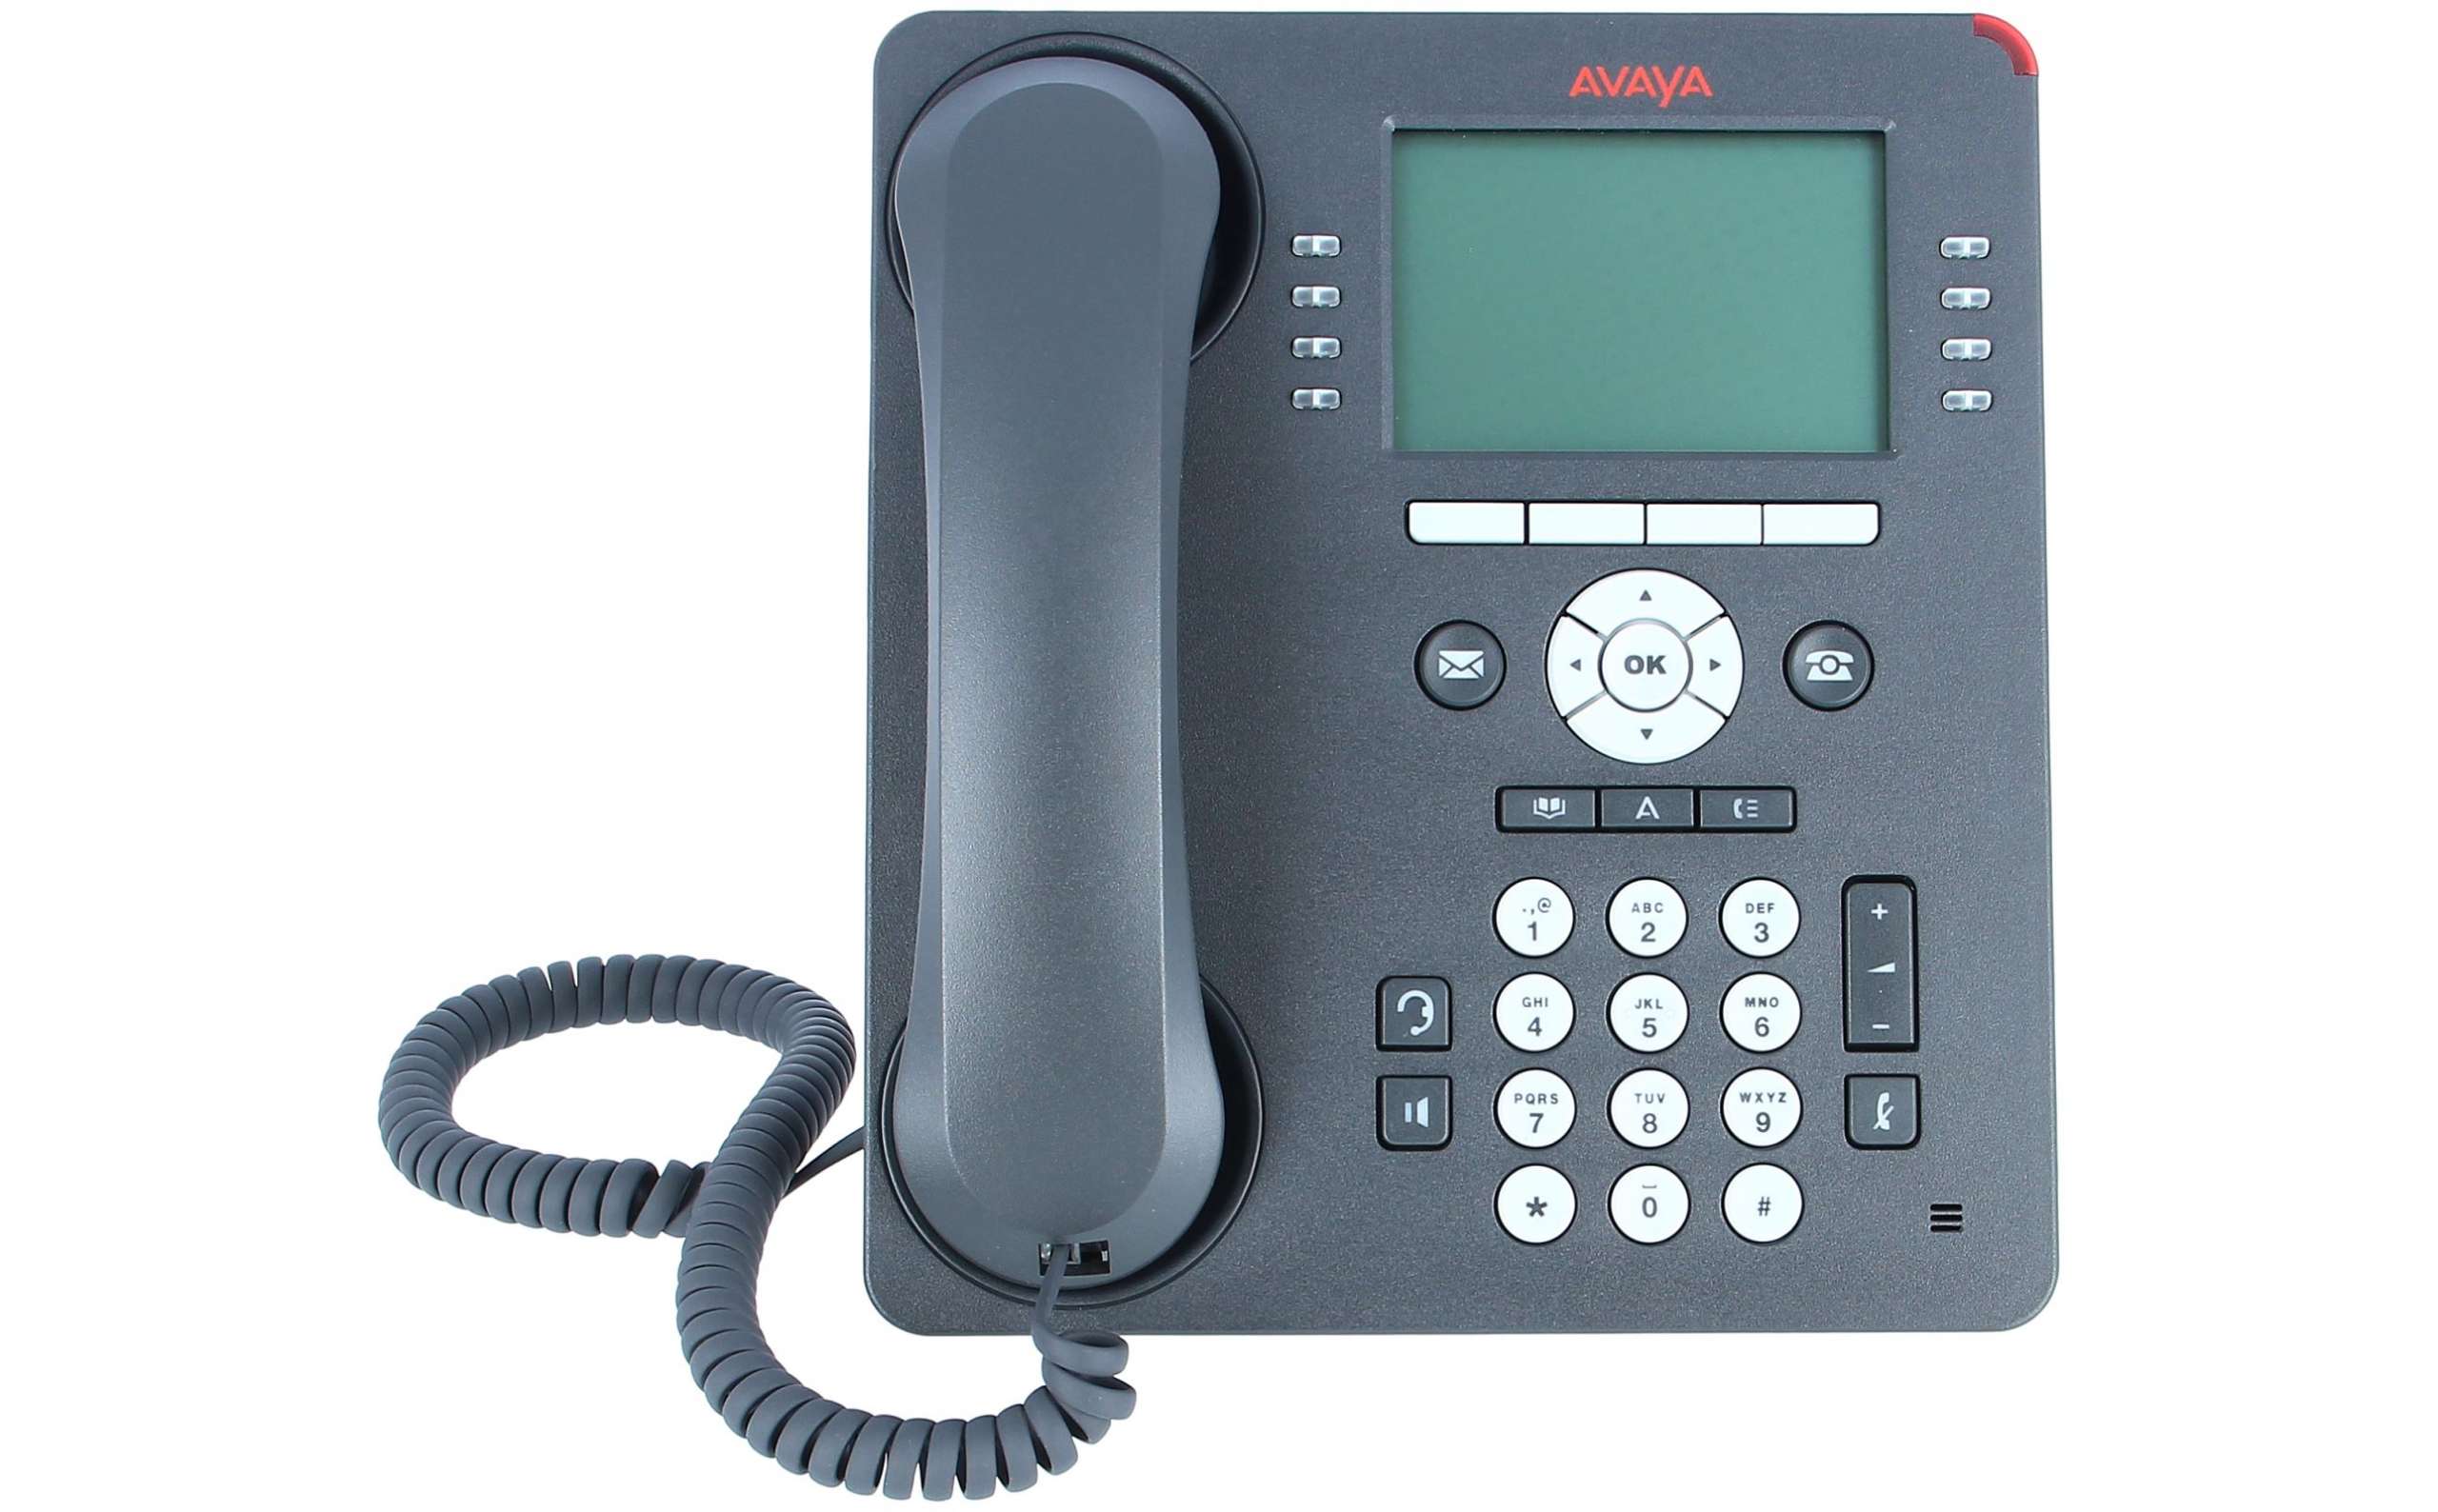 Avaya - 700505424 - IP GRY buy prices refurbished low new online PHONE and 9608G